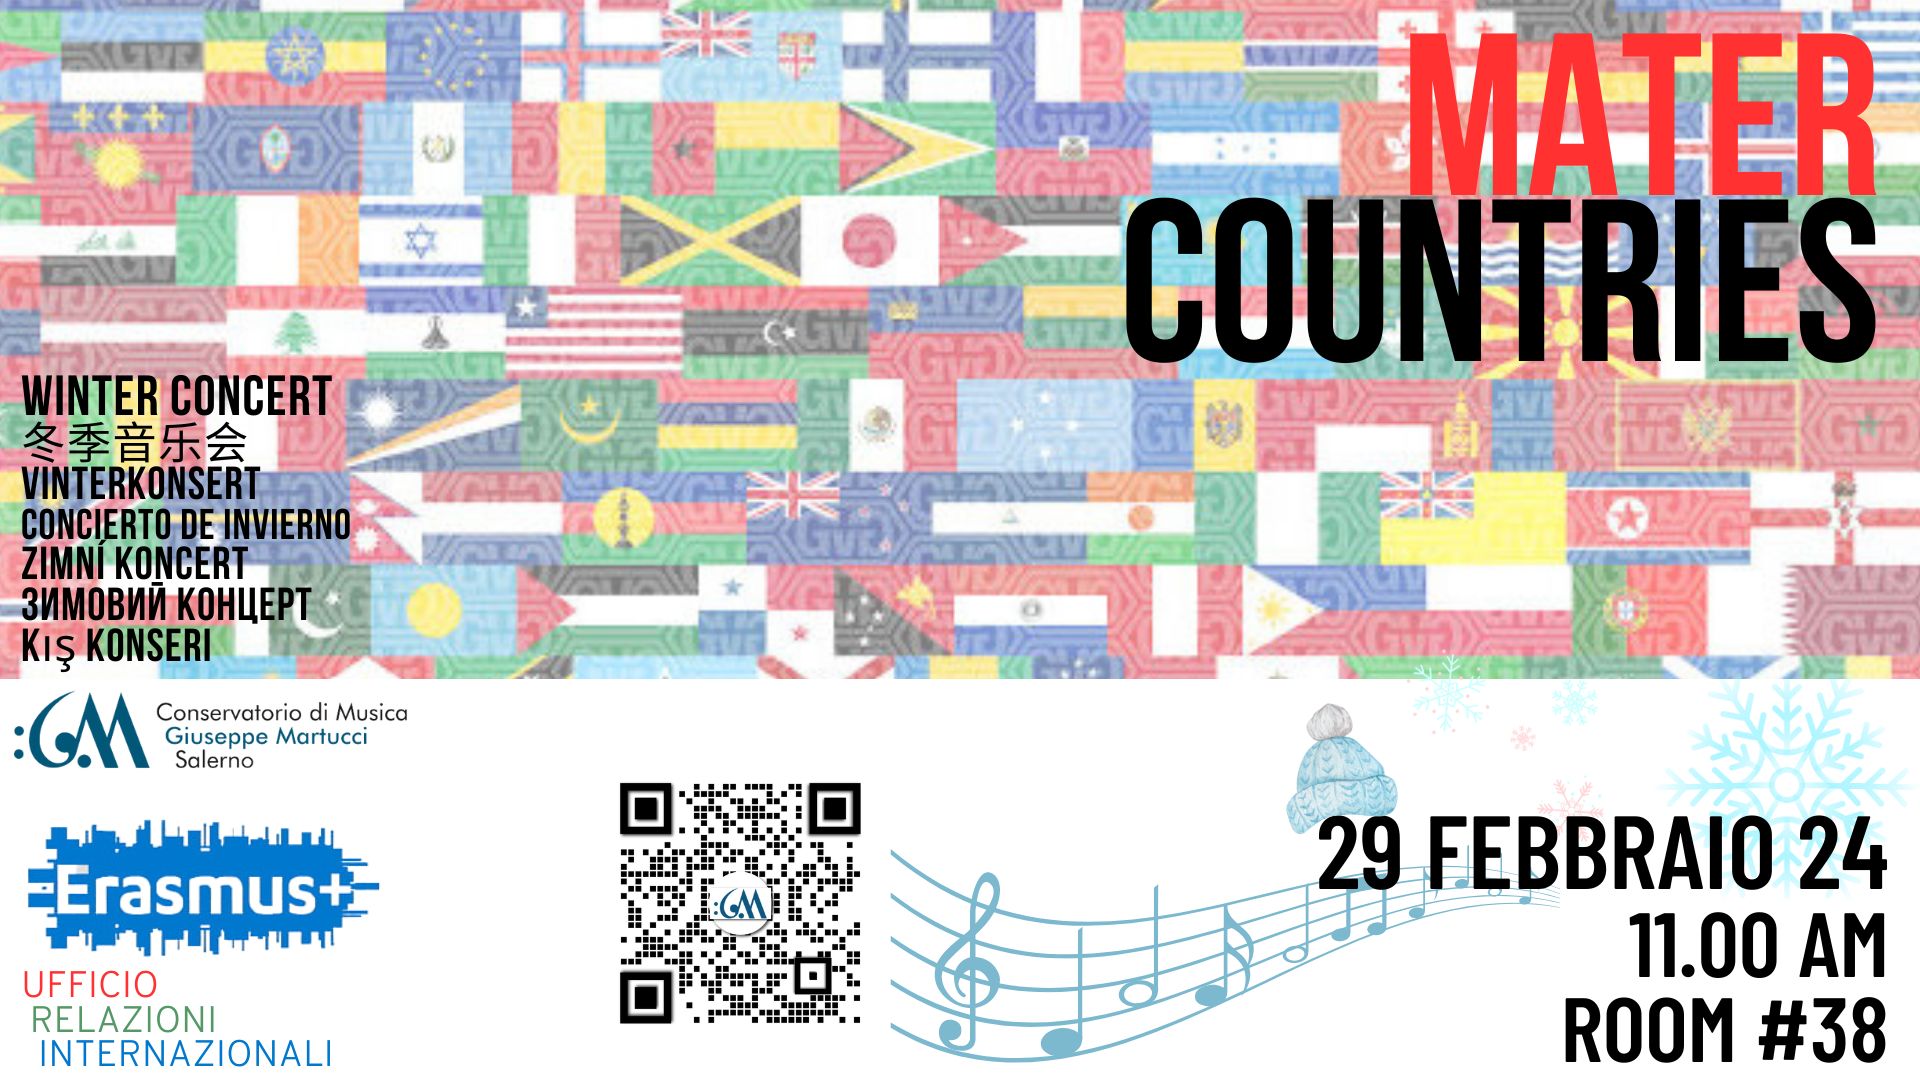 Mater Countries - Winter Concert